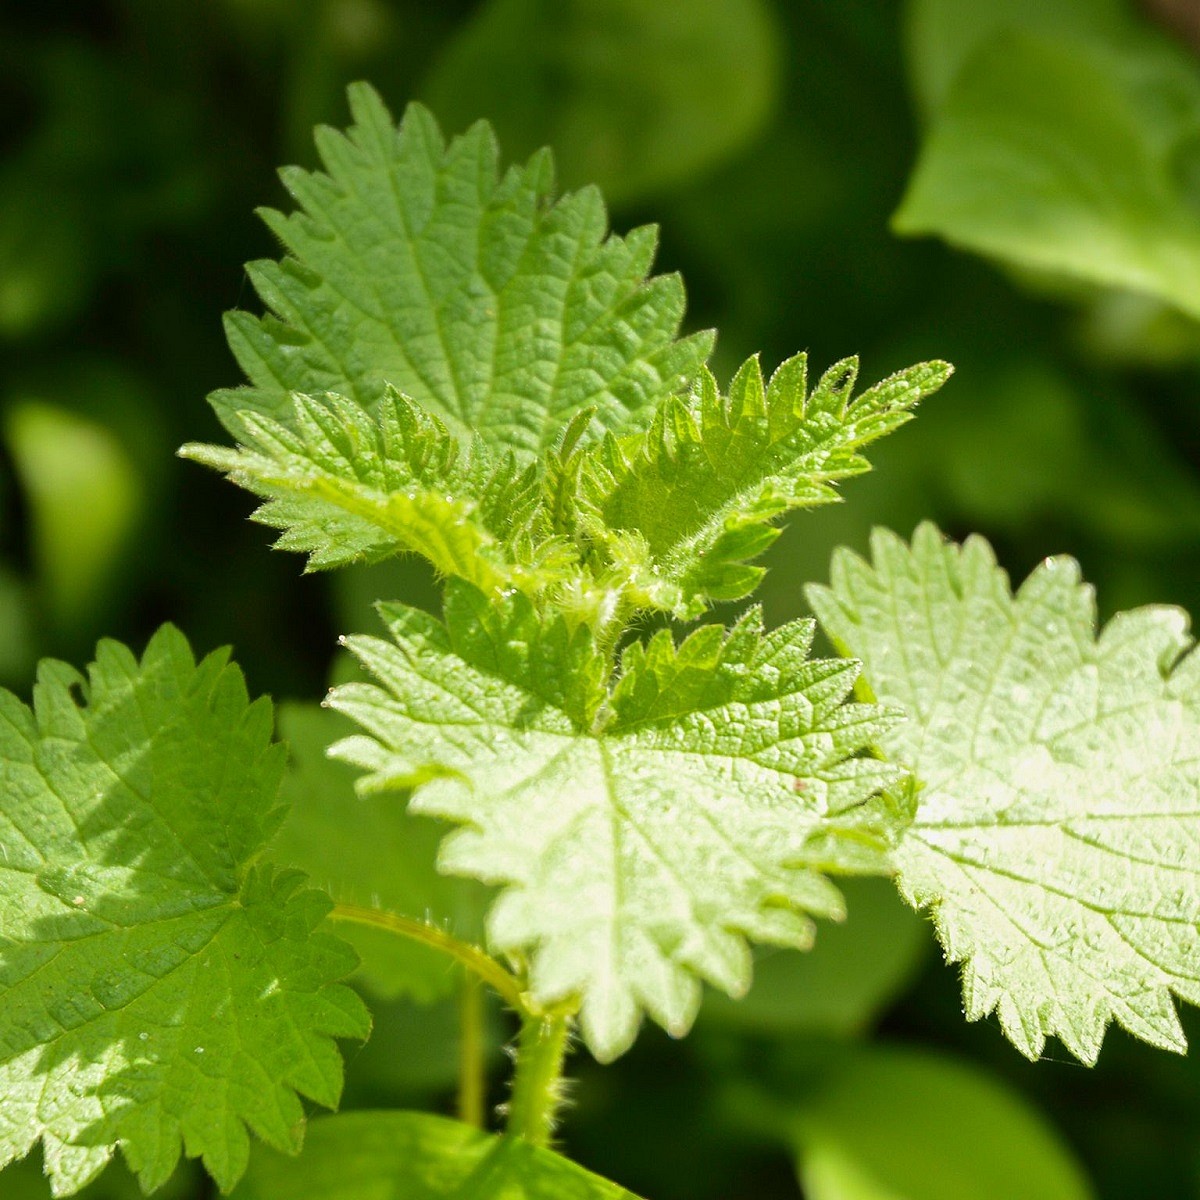 Nettles, a classic early spring hedgerow staple. Get them while they're young  © Richard Prideaux